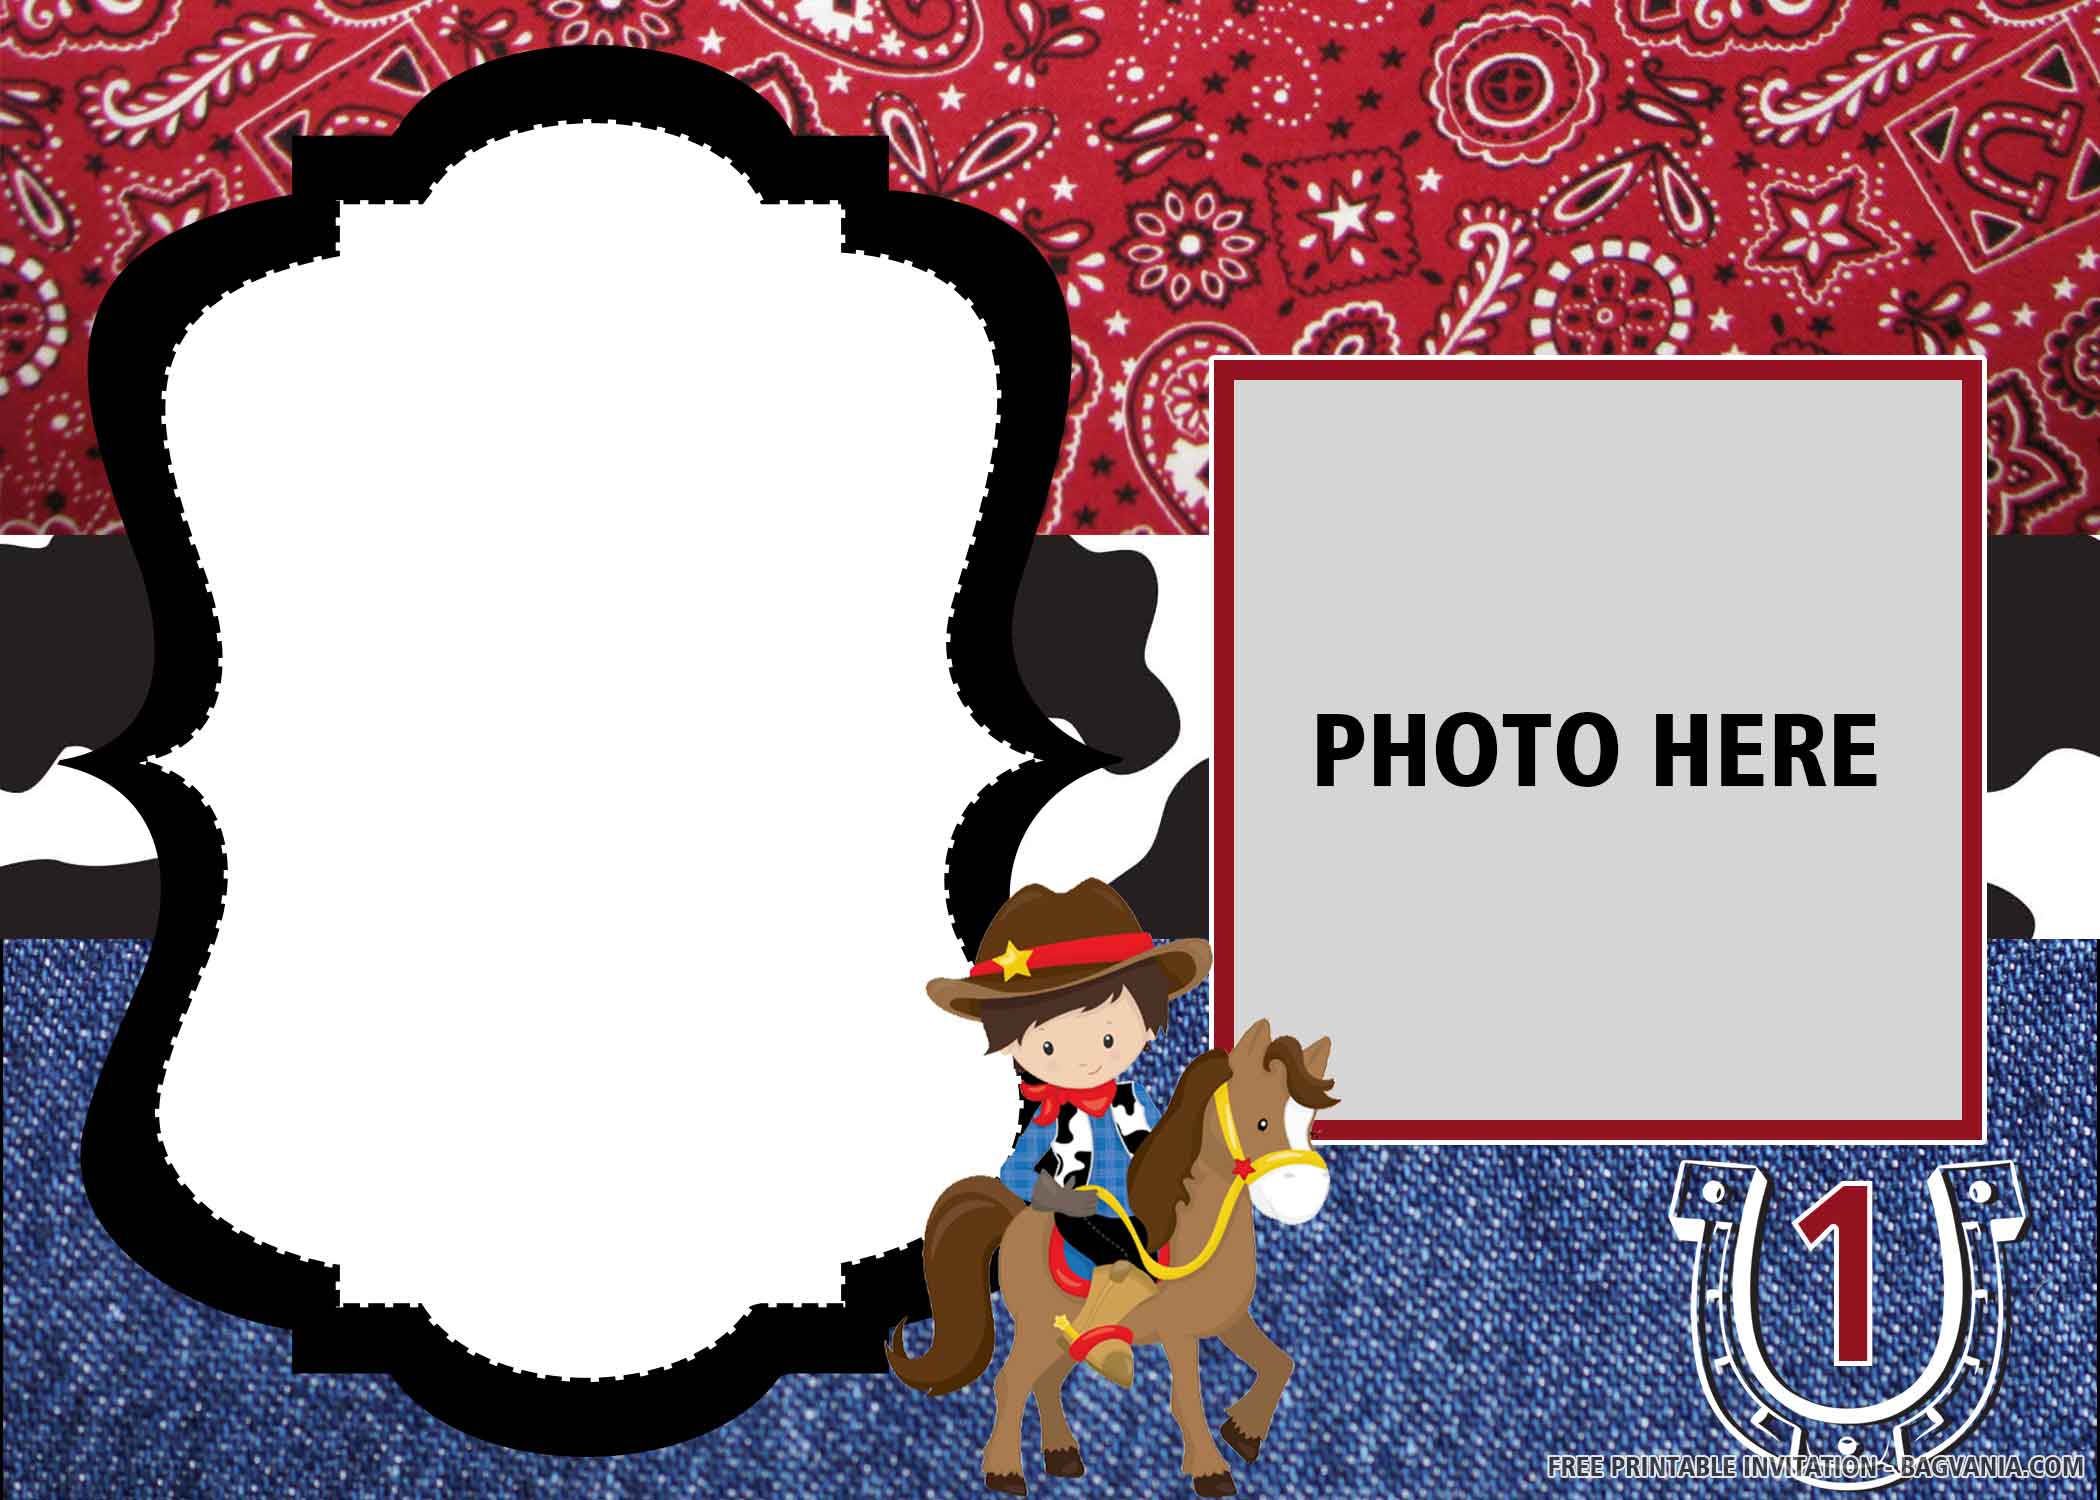 FREE Cowboy with Photo, Number 1, Jeans and Red Batik Backgrounds